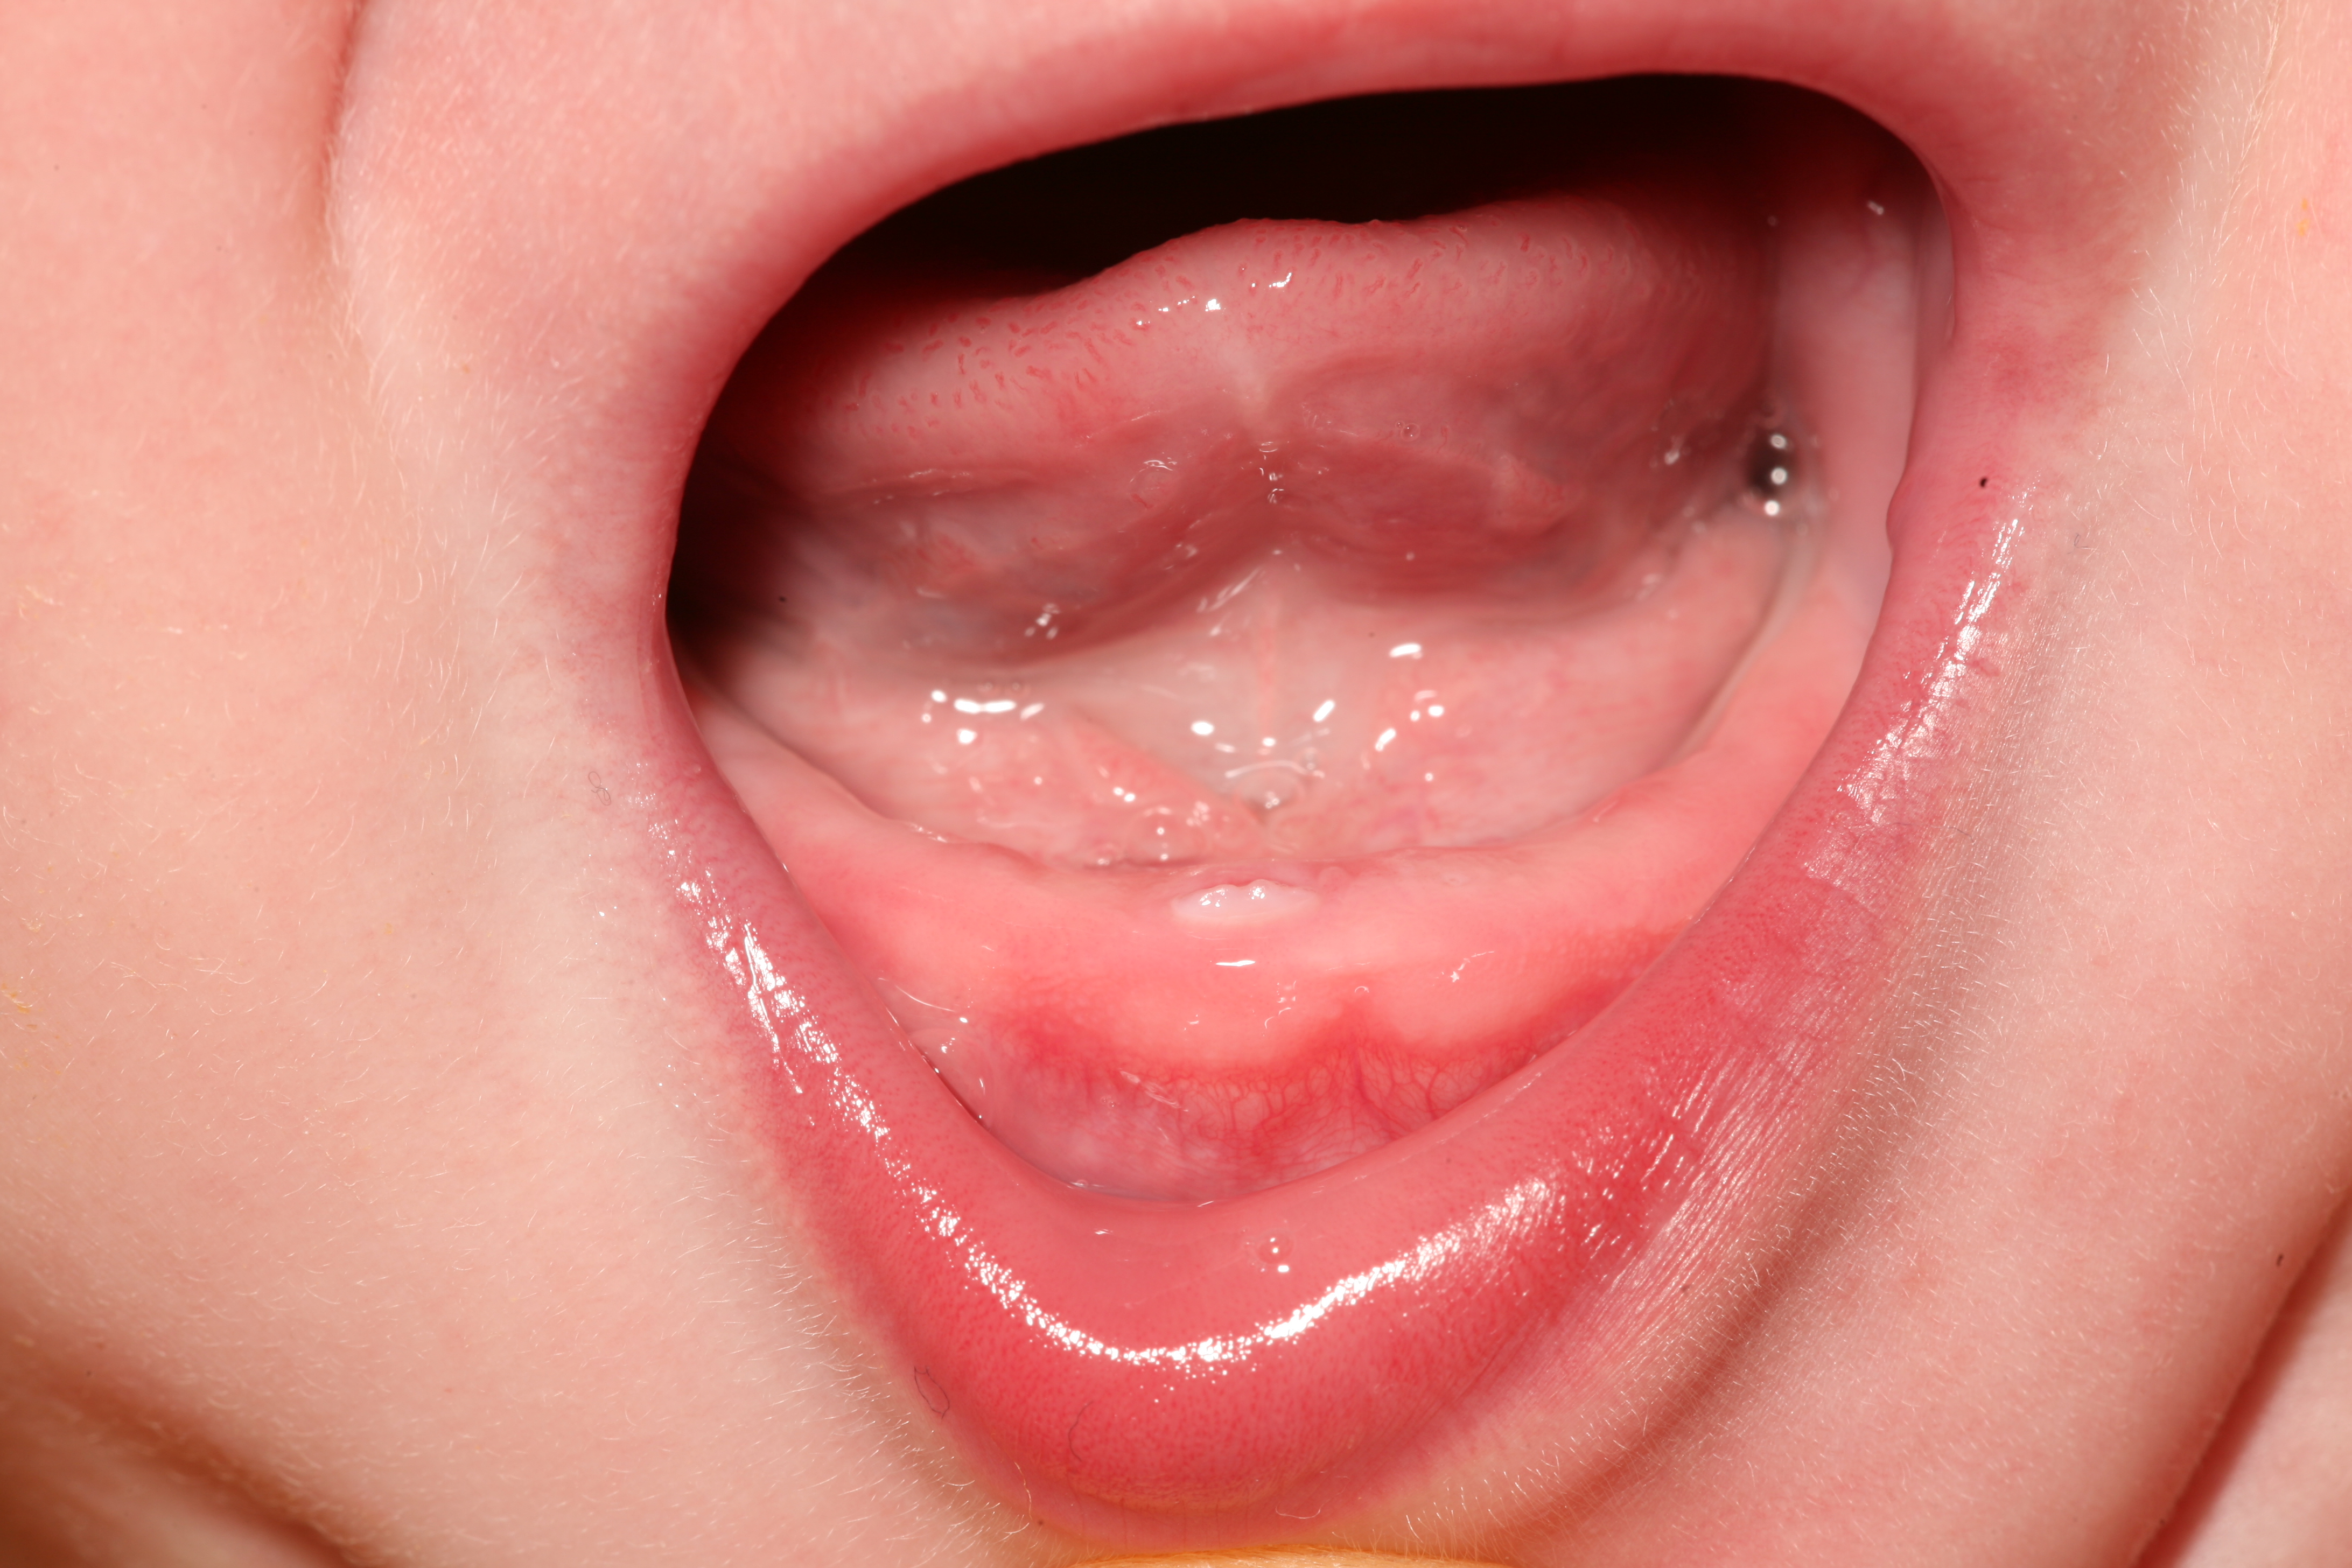 <p>Penetrating Incisor. The lower right incisor is shown penetrating the oral mucosa of a teething baby.&nbsp;</p>